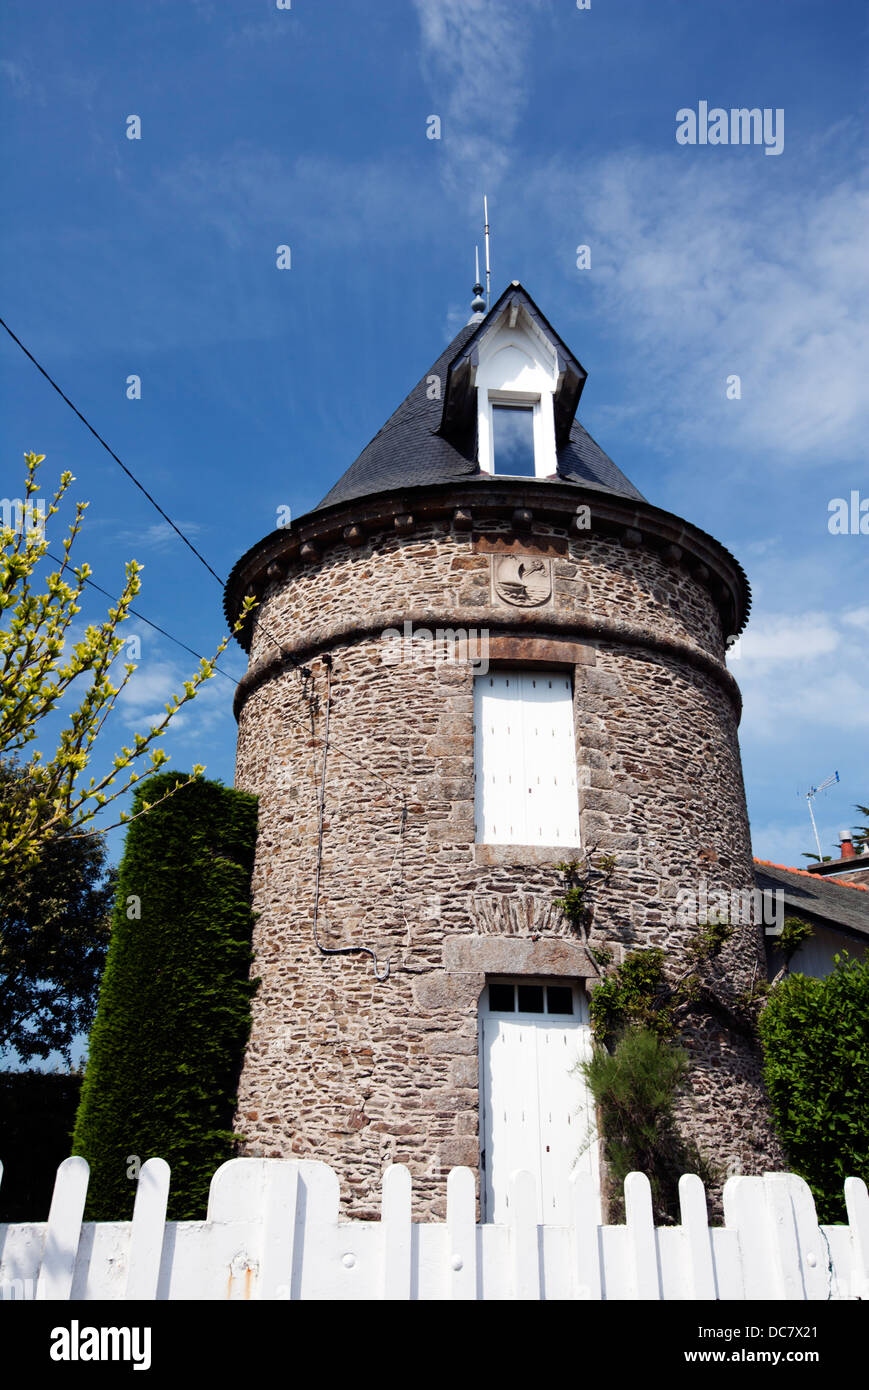 Round turret house Rue des Rimains, Cancale, Brittany, France, Europe Stock Photo